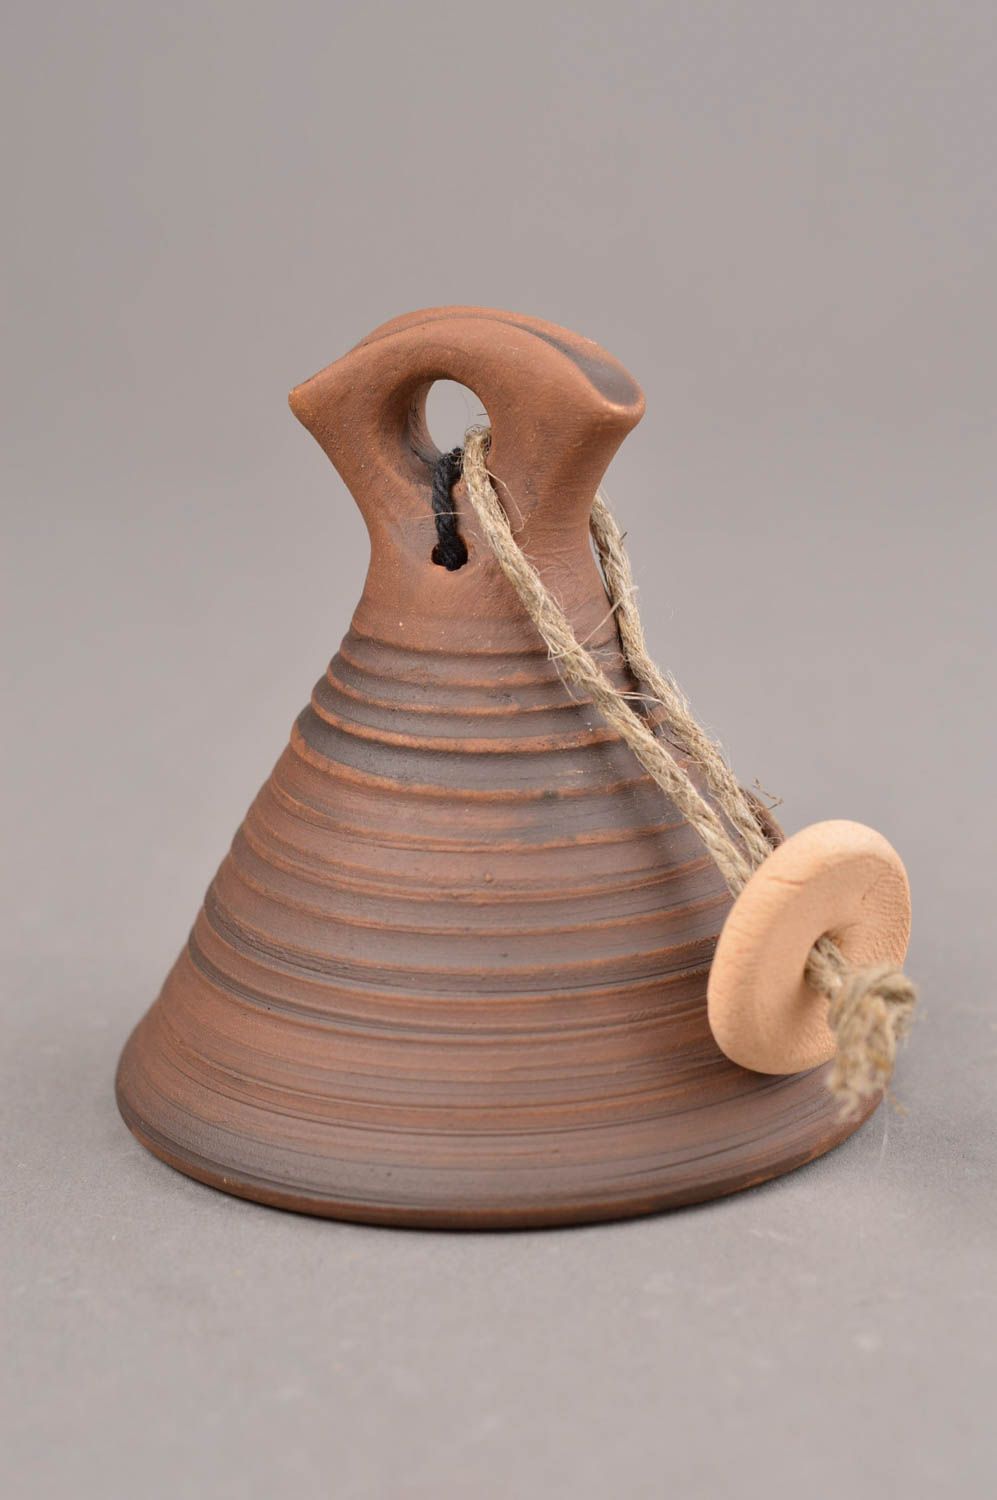 Handmade ceramic bell homemade home decor wall hanging decoration clay bell photo 7